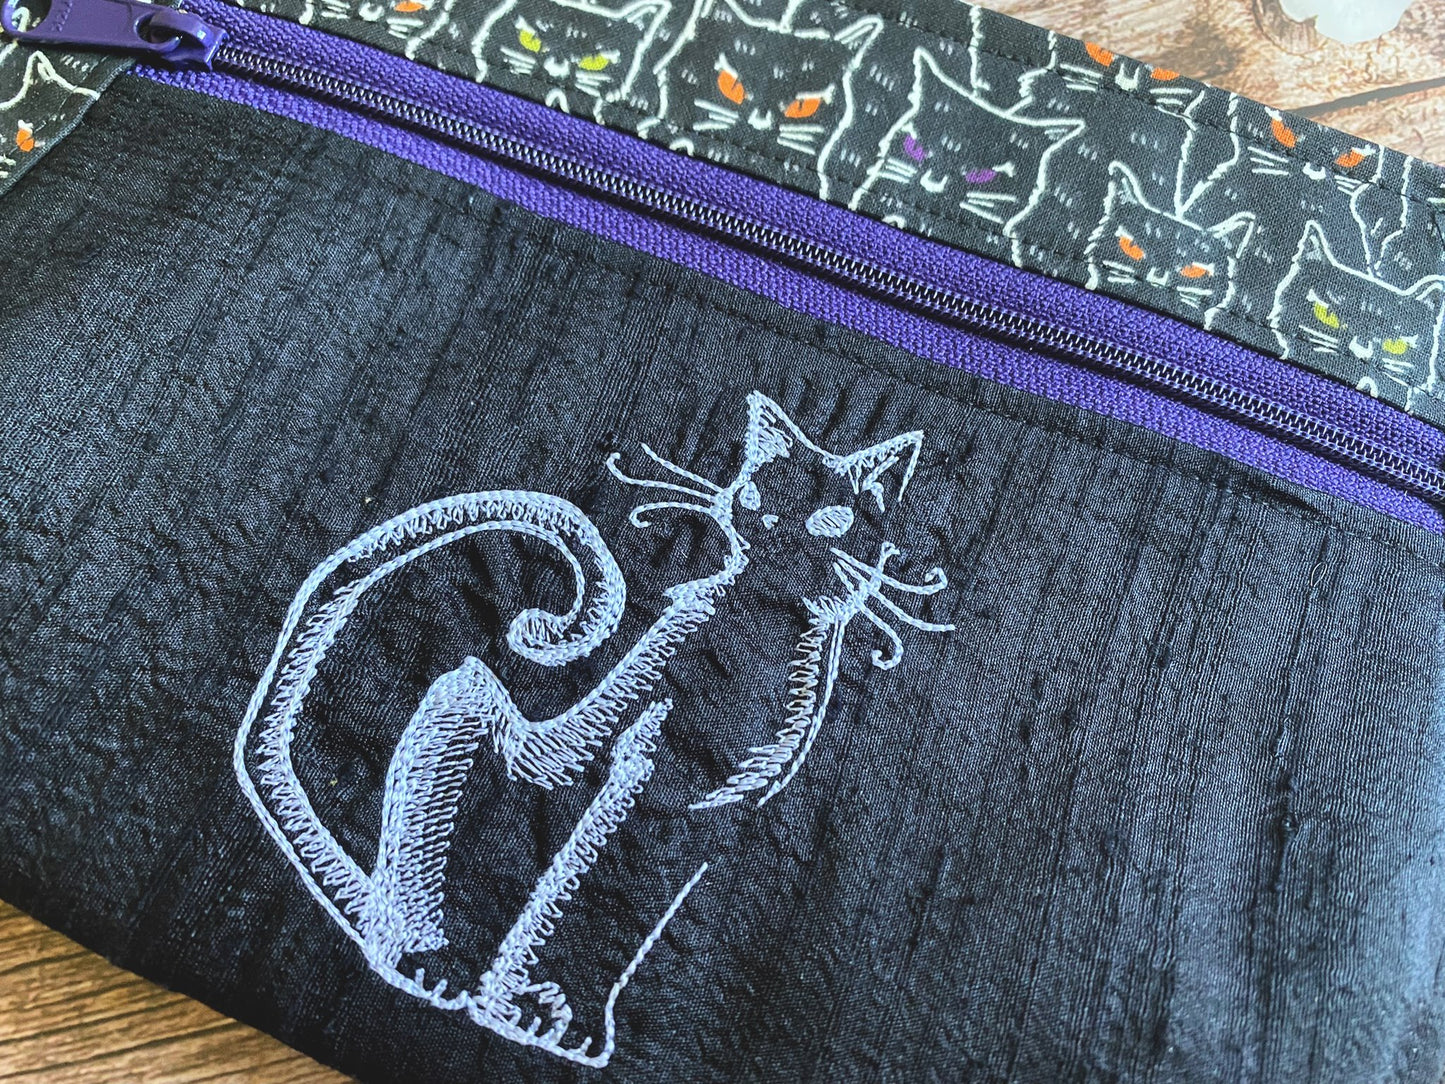 Glowing Kitty Hip or Cossbody Bag (aka Fanny pack!) with Custom Adjustable Waistband